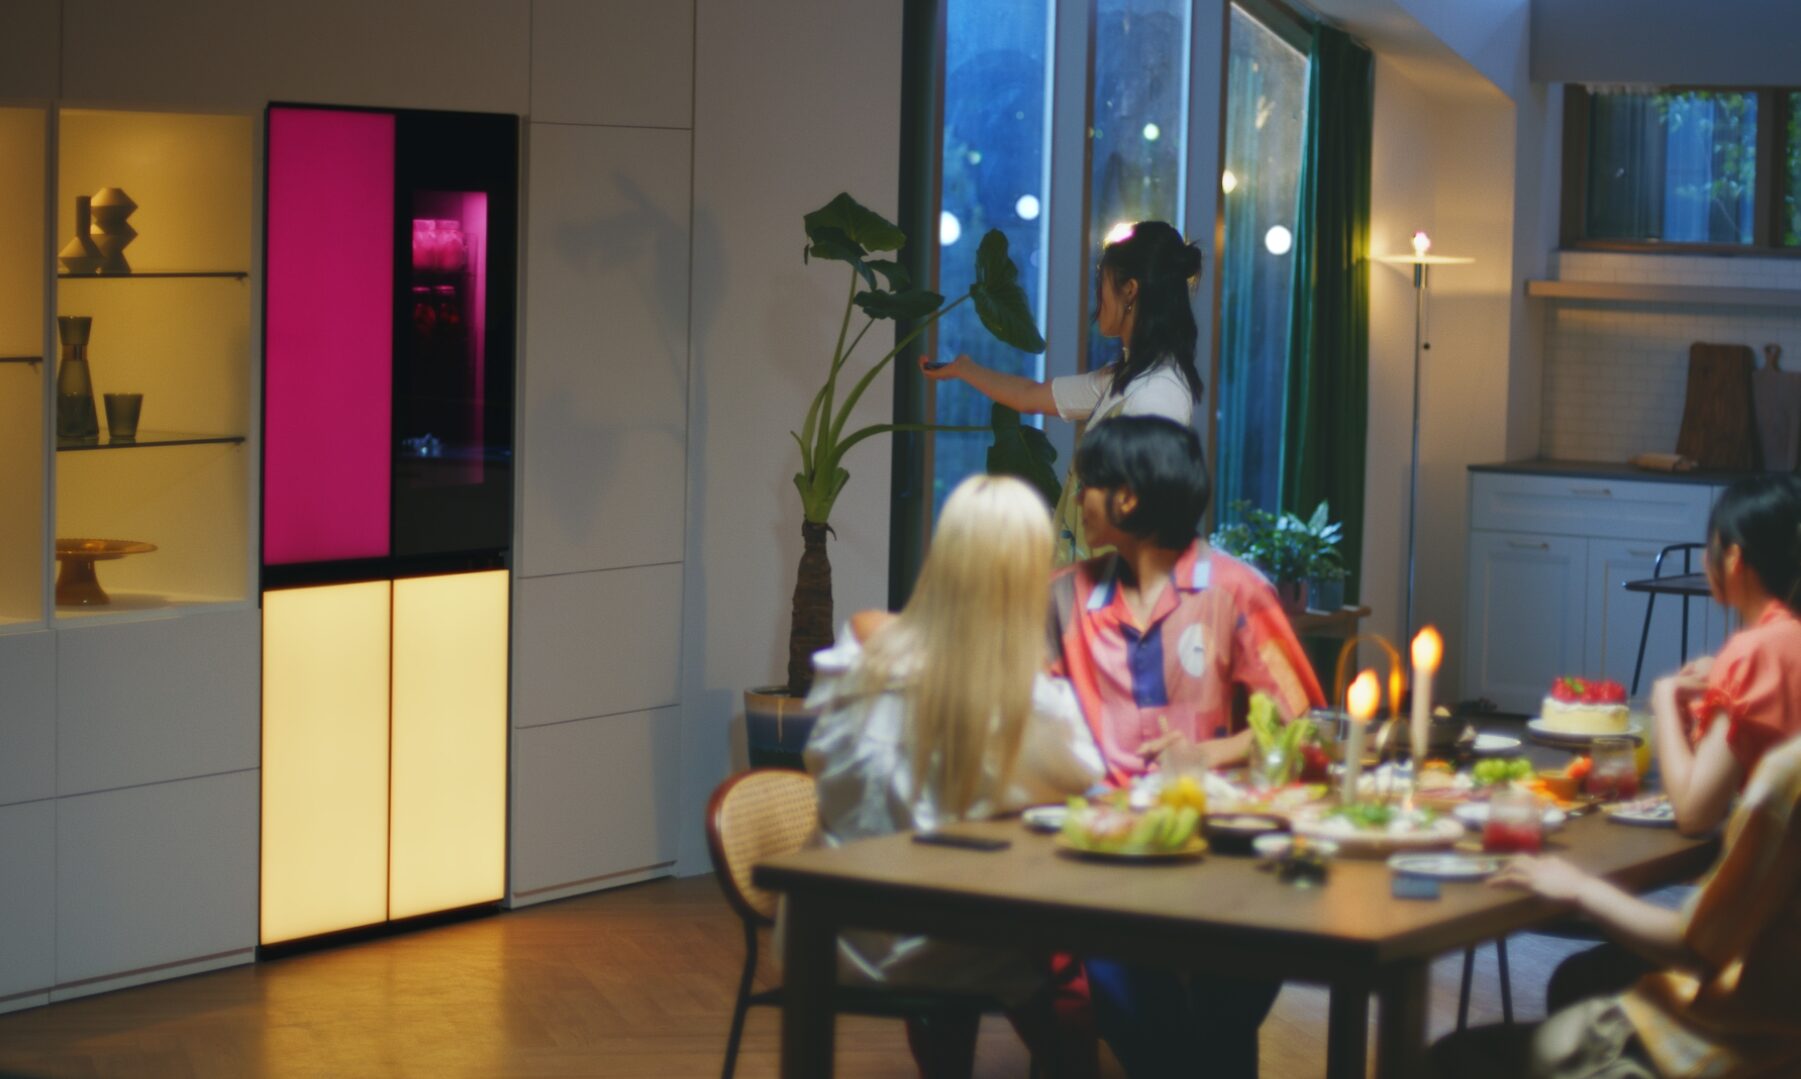 A woman is remotely playing music via a built-in Bluetooth speaker of the LG MoodUP refrigerator at a house party.